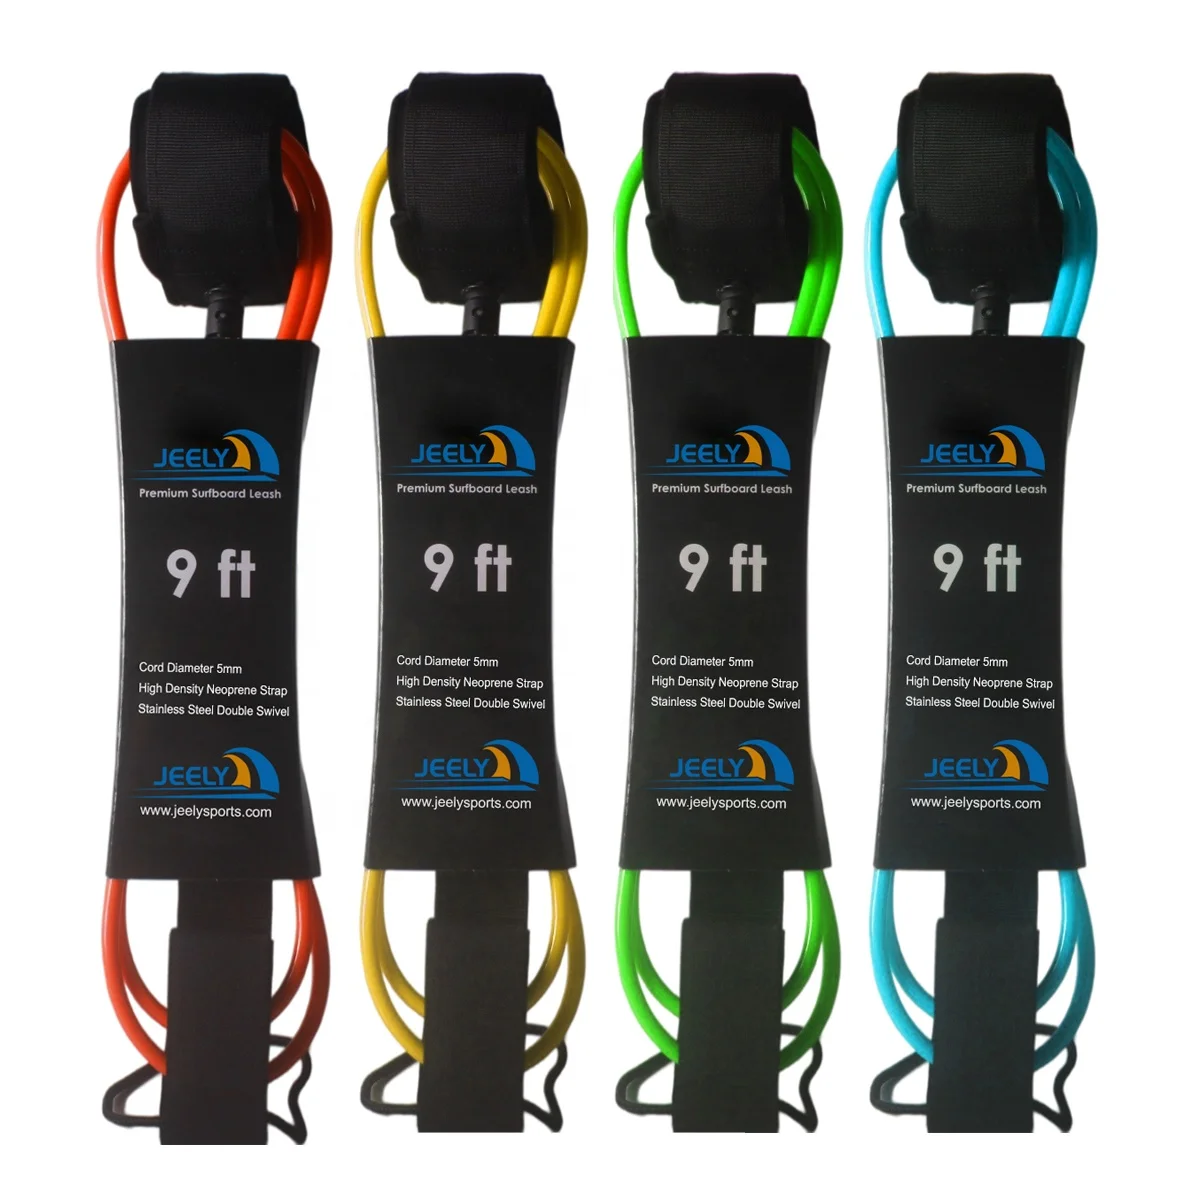 

6ft 8ft 10ft 12ft Customized 7mm Taiwan or Germany TPU Surf Leash/Paddle Leash/Surfboard Leash Ankle Cuff Knee Cuff